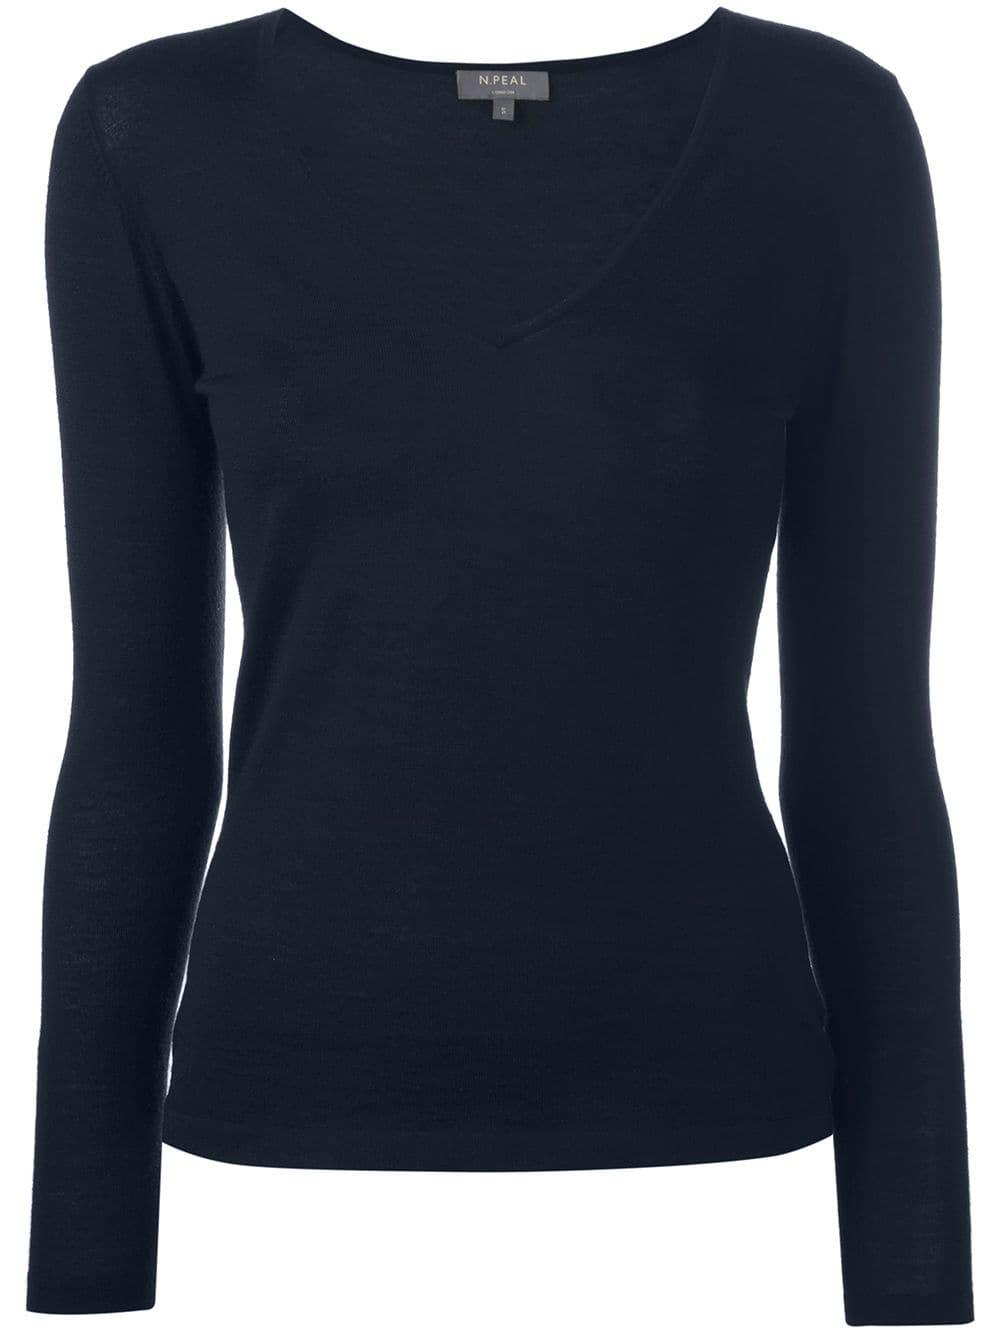 N.Peal Cashmere Plain Top in Blue - Lyst